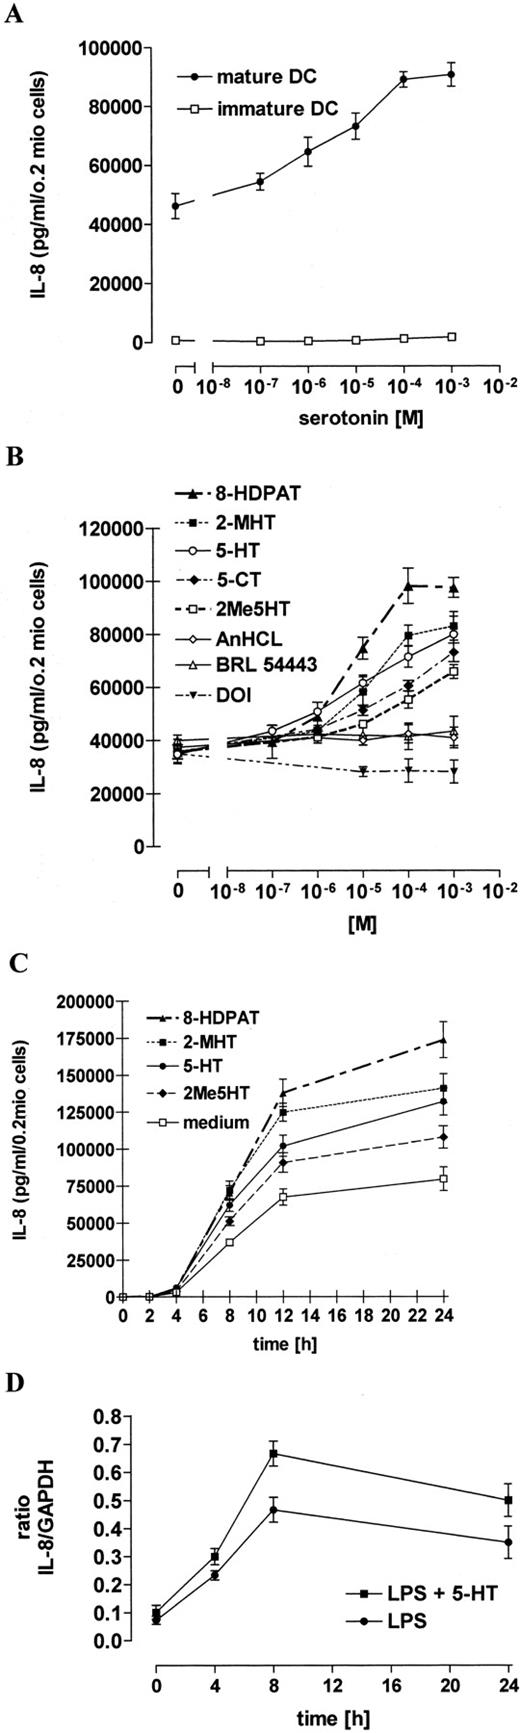 FIGURE 7. Stimulation of serotoninergic receptors induces secretion of IL-8 from mature but not immature DC. Immature and mature DC were stimulated with the indicated concentrations of 5-HT (A). Supernatants were collected 24 h after stimulation and IL-8 concentration was measured by ELISA. Results are given as mean ± SEM (n = 4). Mature DC were stimulated with the indicated concentrations of different 5-HTR agonists (B). Data are presented as mean ± SEM (n = 4). Time dependency of the 5-HTR induced IL-8 production in mature DC (C). DC were stimulated with optimal concentrations of the indicated agonists. Stimulation of cells and IL-8 measurement were performed as described for A. Data are presented as mean ± SEM (n = 3). IL-8 mRNA expression during LPS-induced DC maturation was analyzed in the absence or presence of 5-HT (D). Total RNA was isolated from DC (1 × 106) stimulated with LPS 3 μg/ml in the absence or presence of 10−4 M 5-HT for 4, 12, and 24 h. IL-8 mRNA expression was quantified as described in Materials and Methods. D, Number of transcripts is normalized to the number of copies of GAPDH ones. Data are means ± SEM (n = 4).